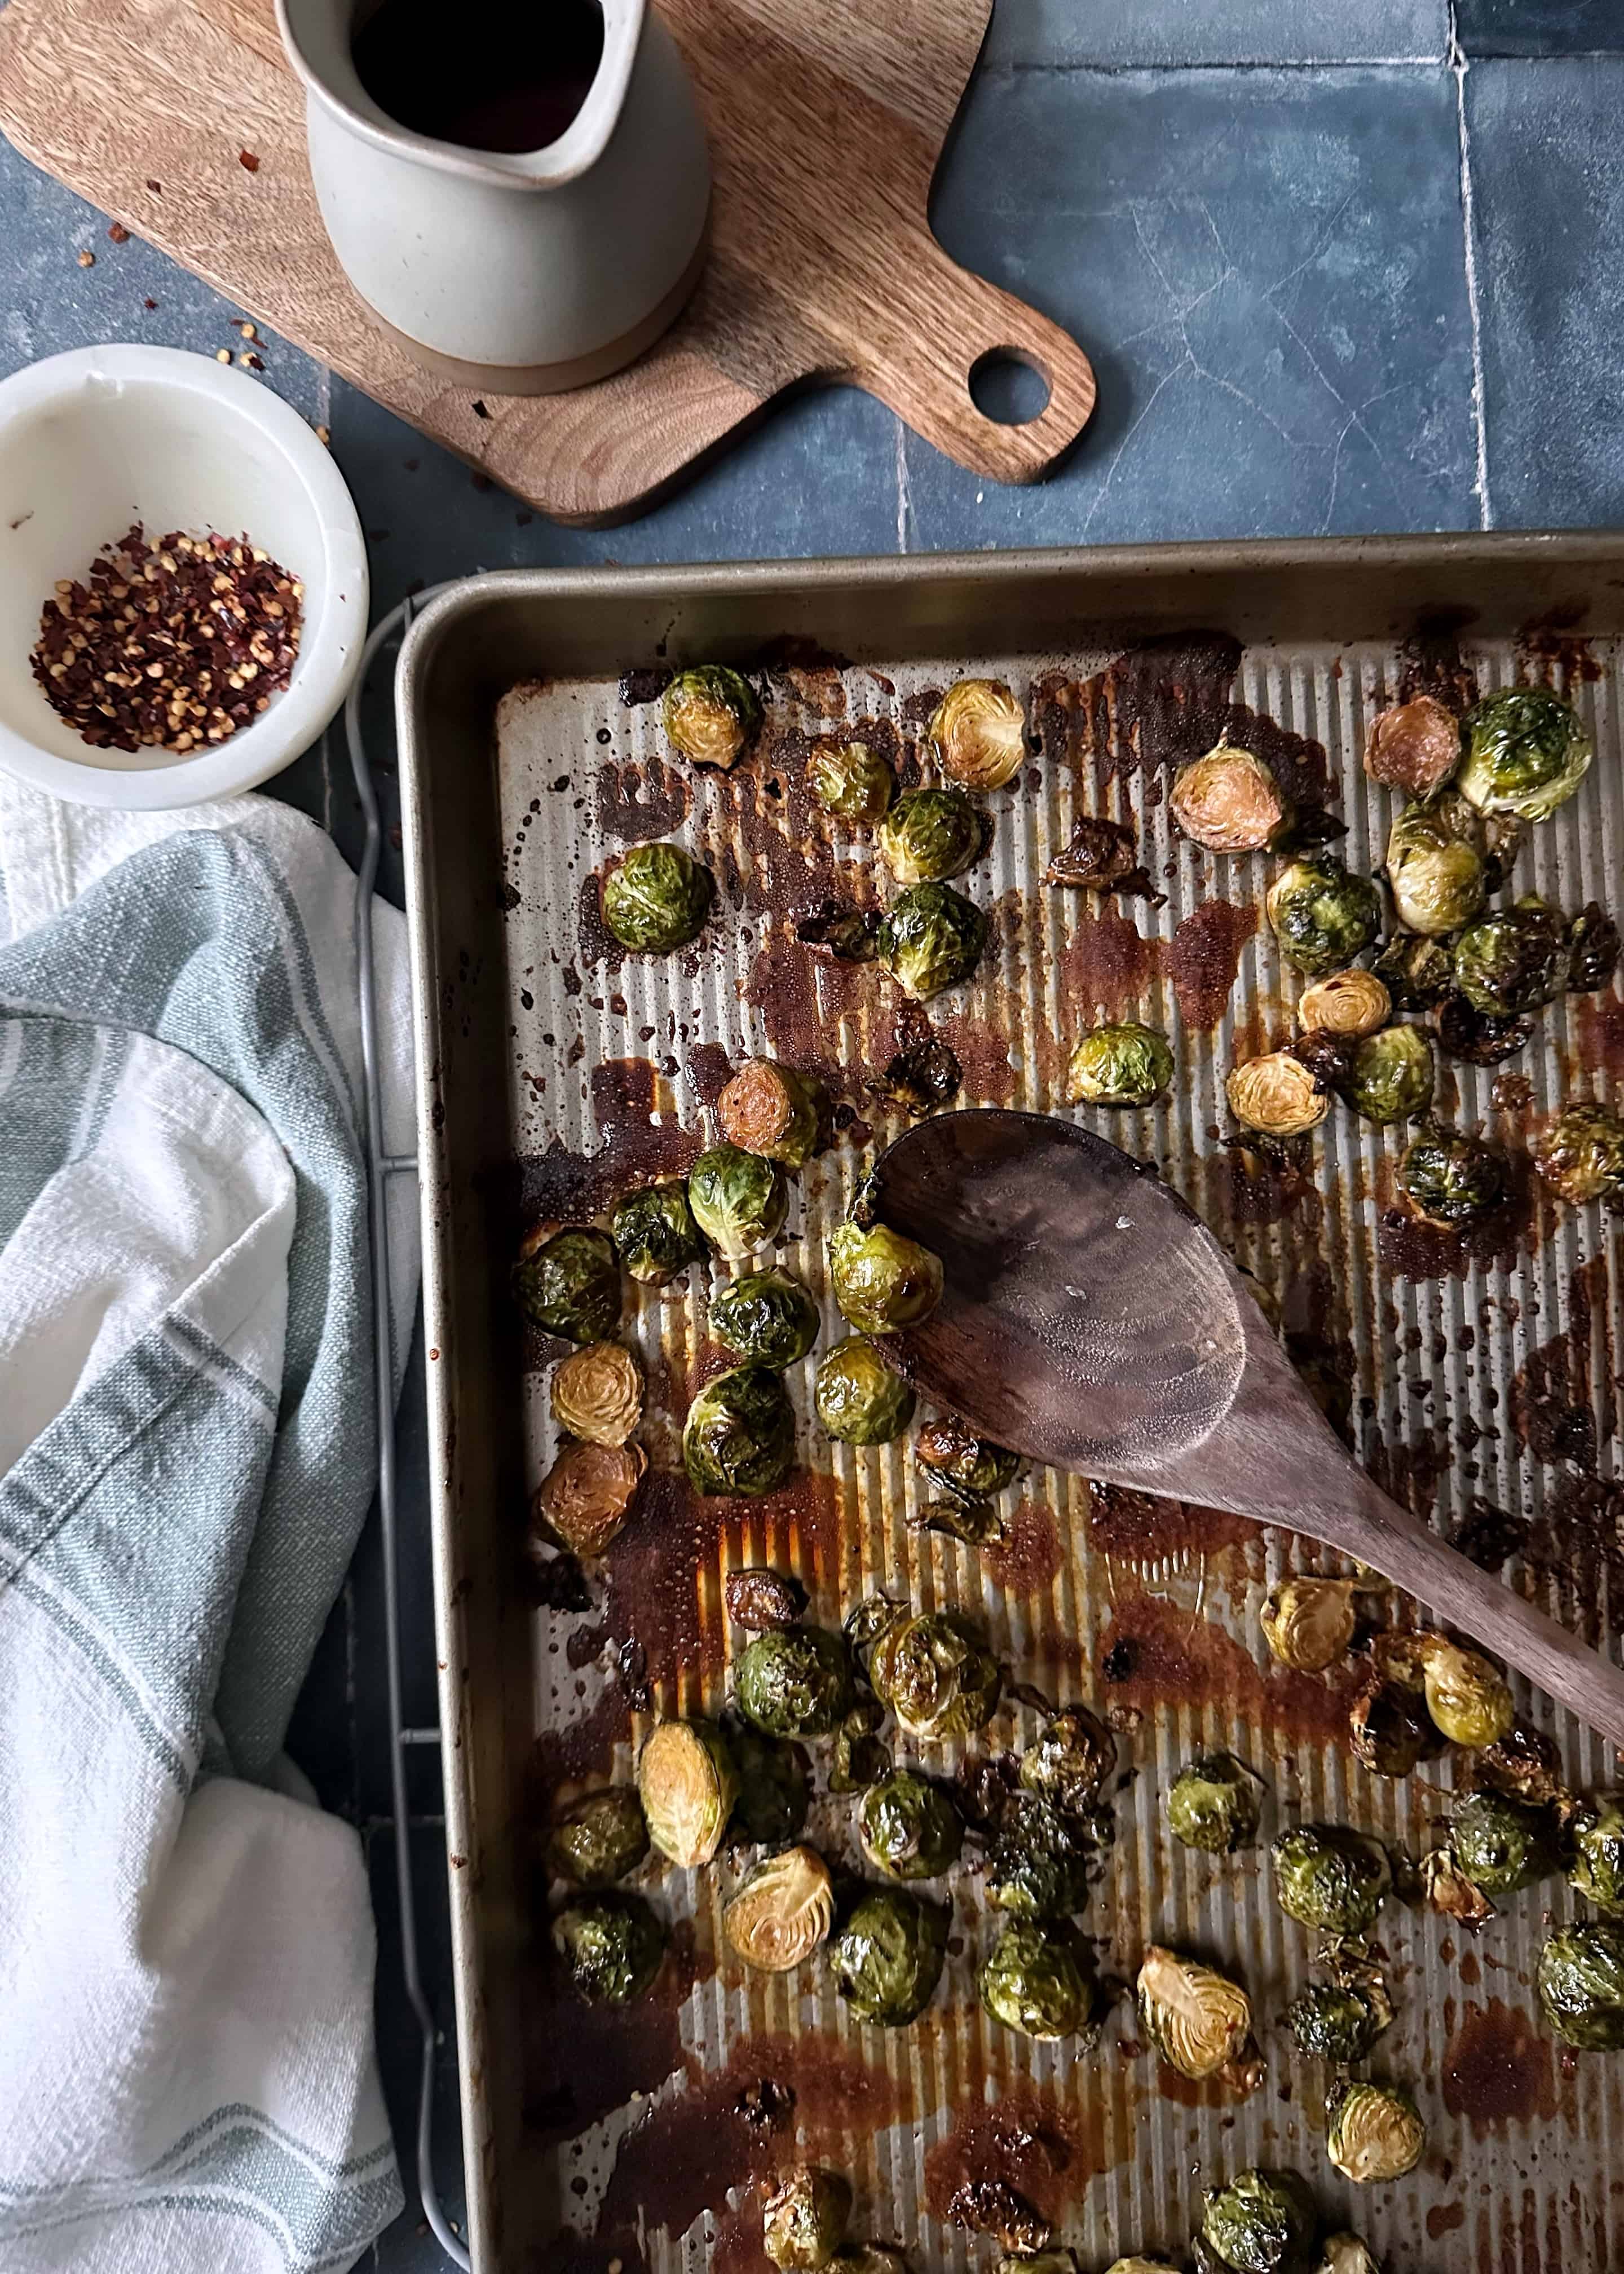 chili maple balsamic brussels sprouts on baking tray